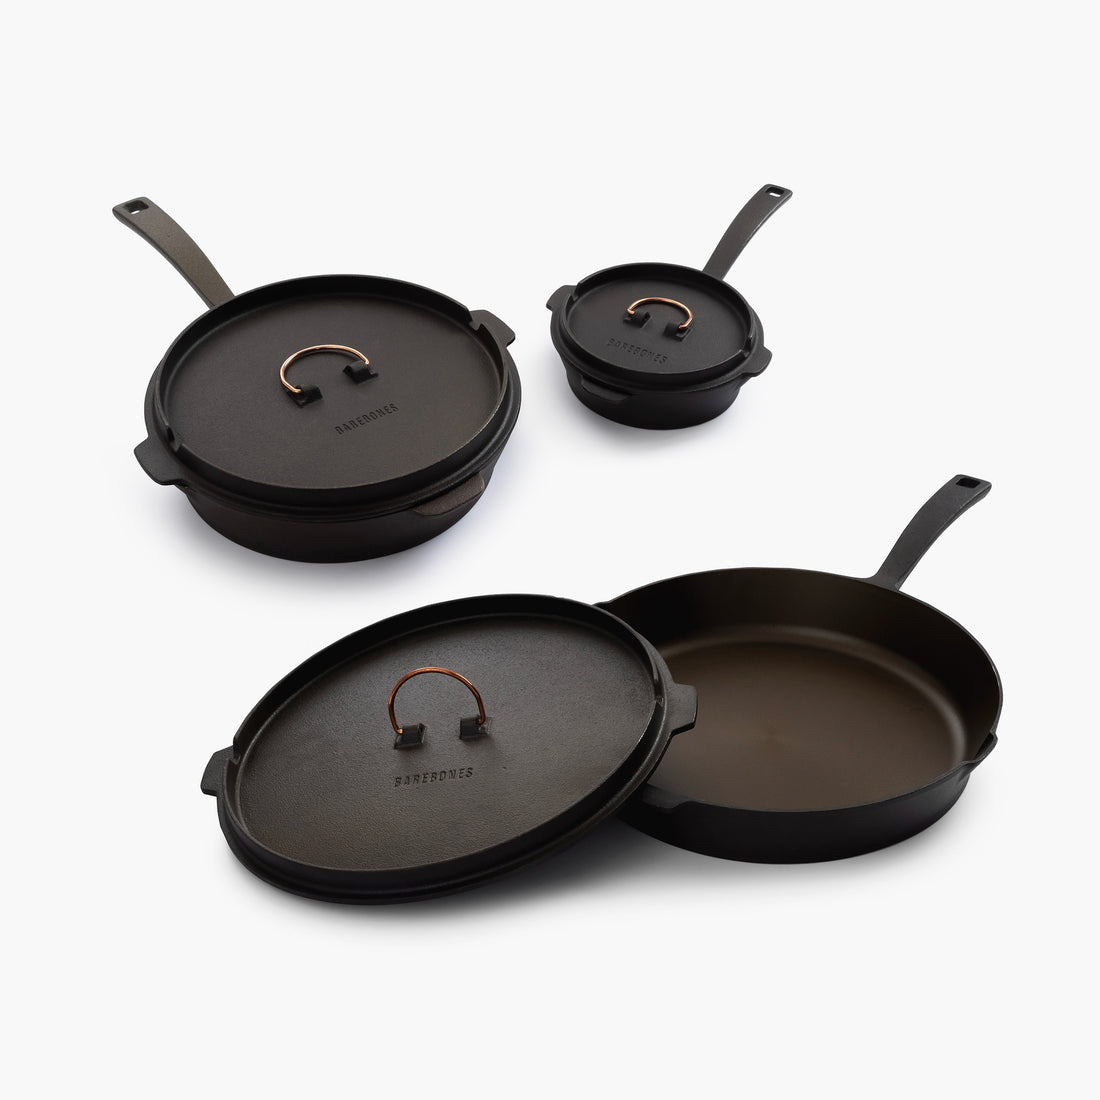 All-in-One Cast Iron Skillet - Three Sizes Available